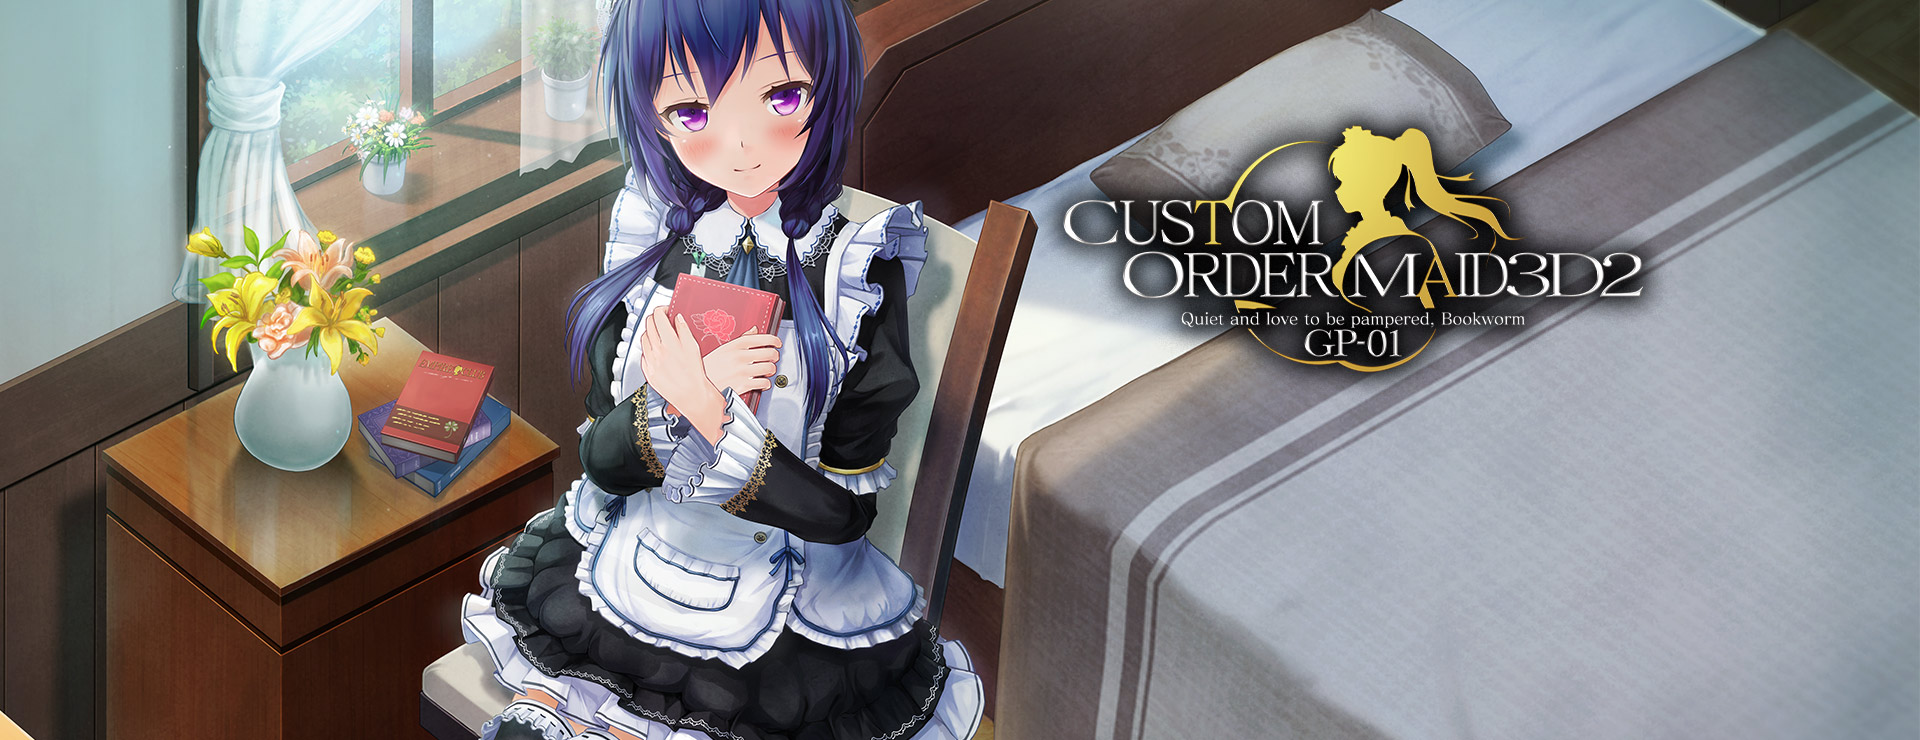 Custom Order Maid 3D2 - Quiet and love to be pampered Bookworm GP-01 DLC - Simulación Juego